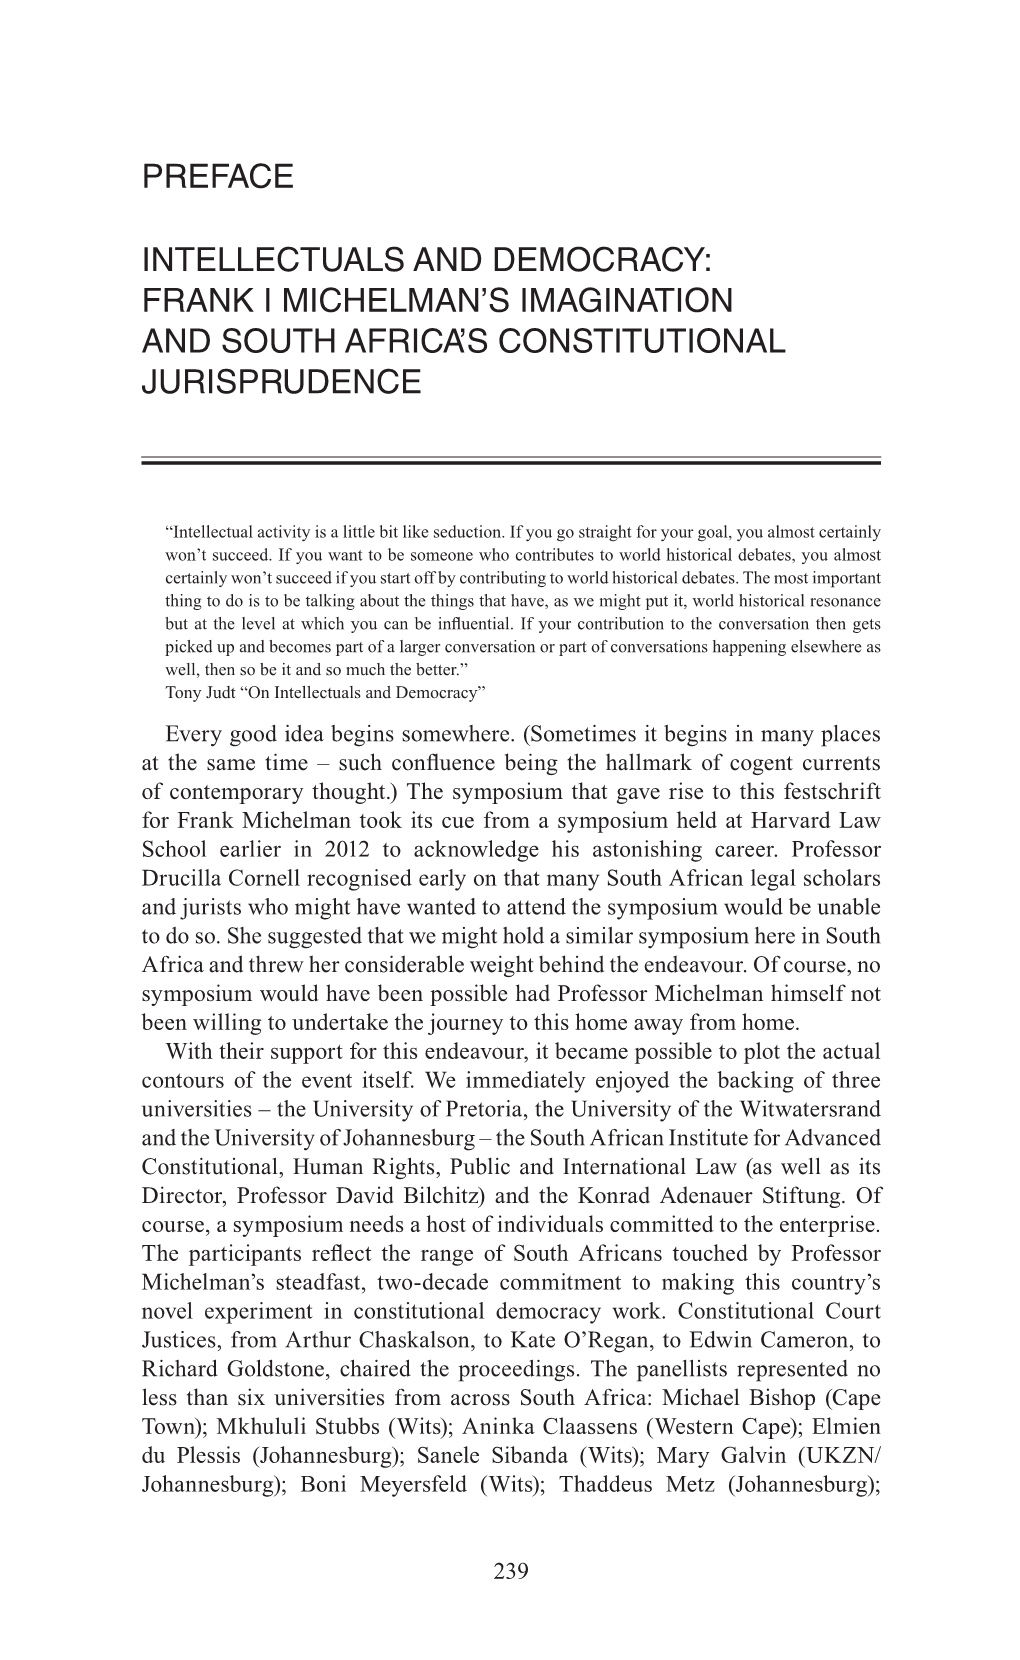 Frank I Michelman's Imagination and South Africa's Constitutional